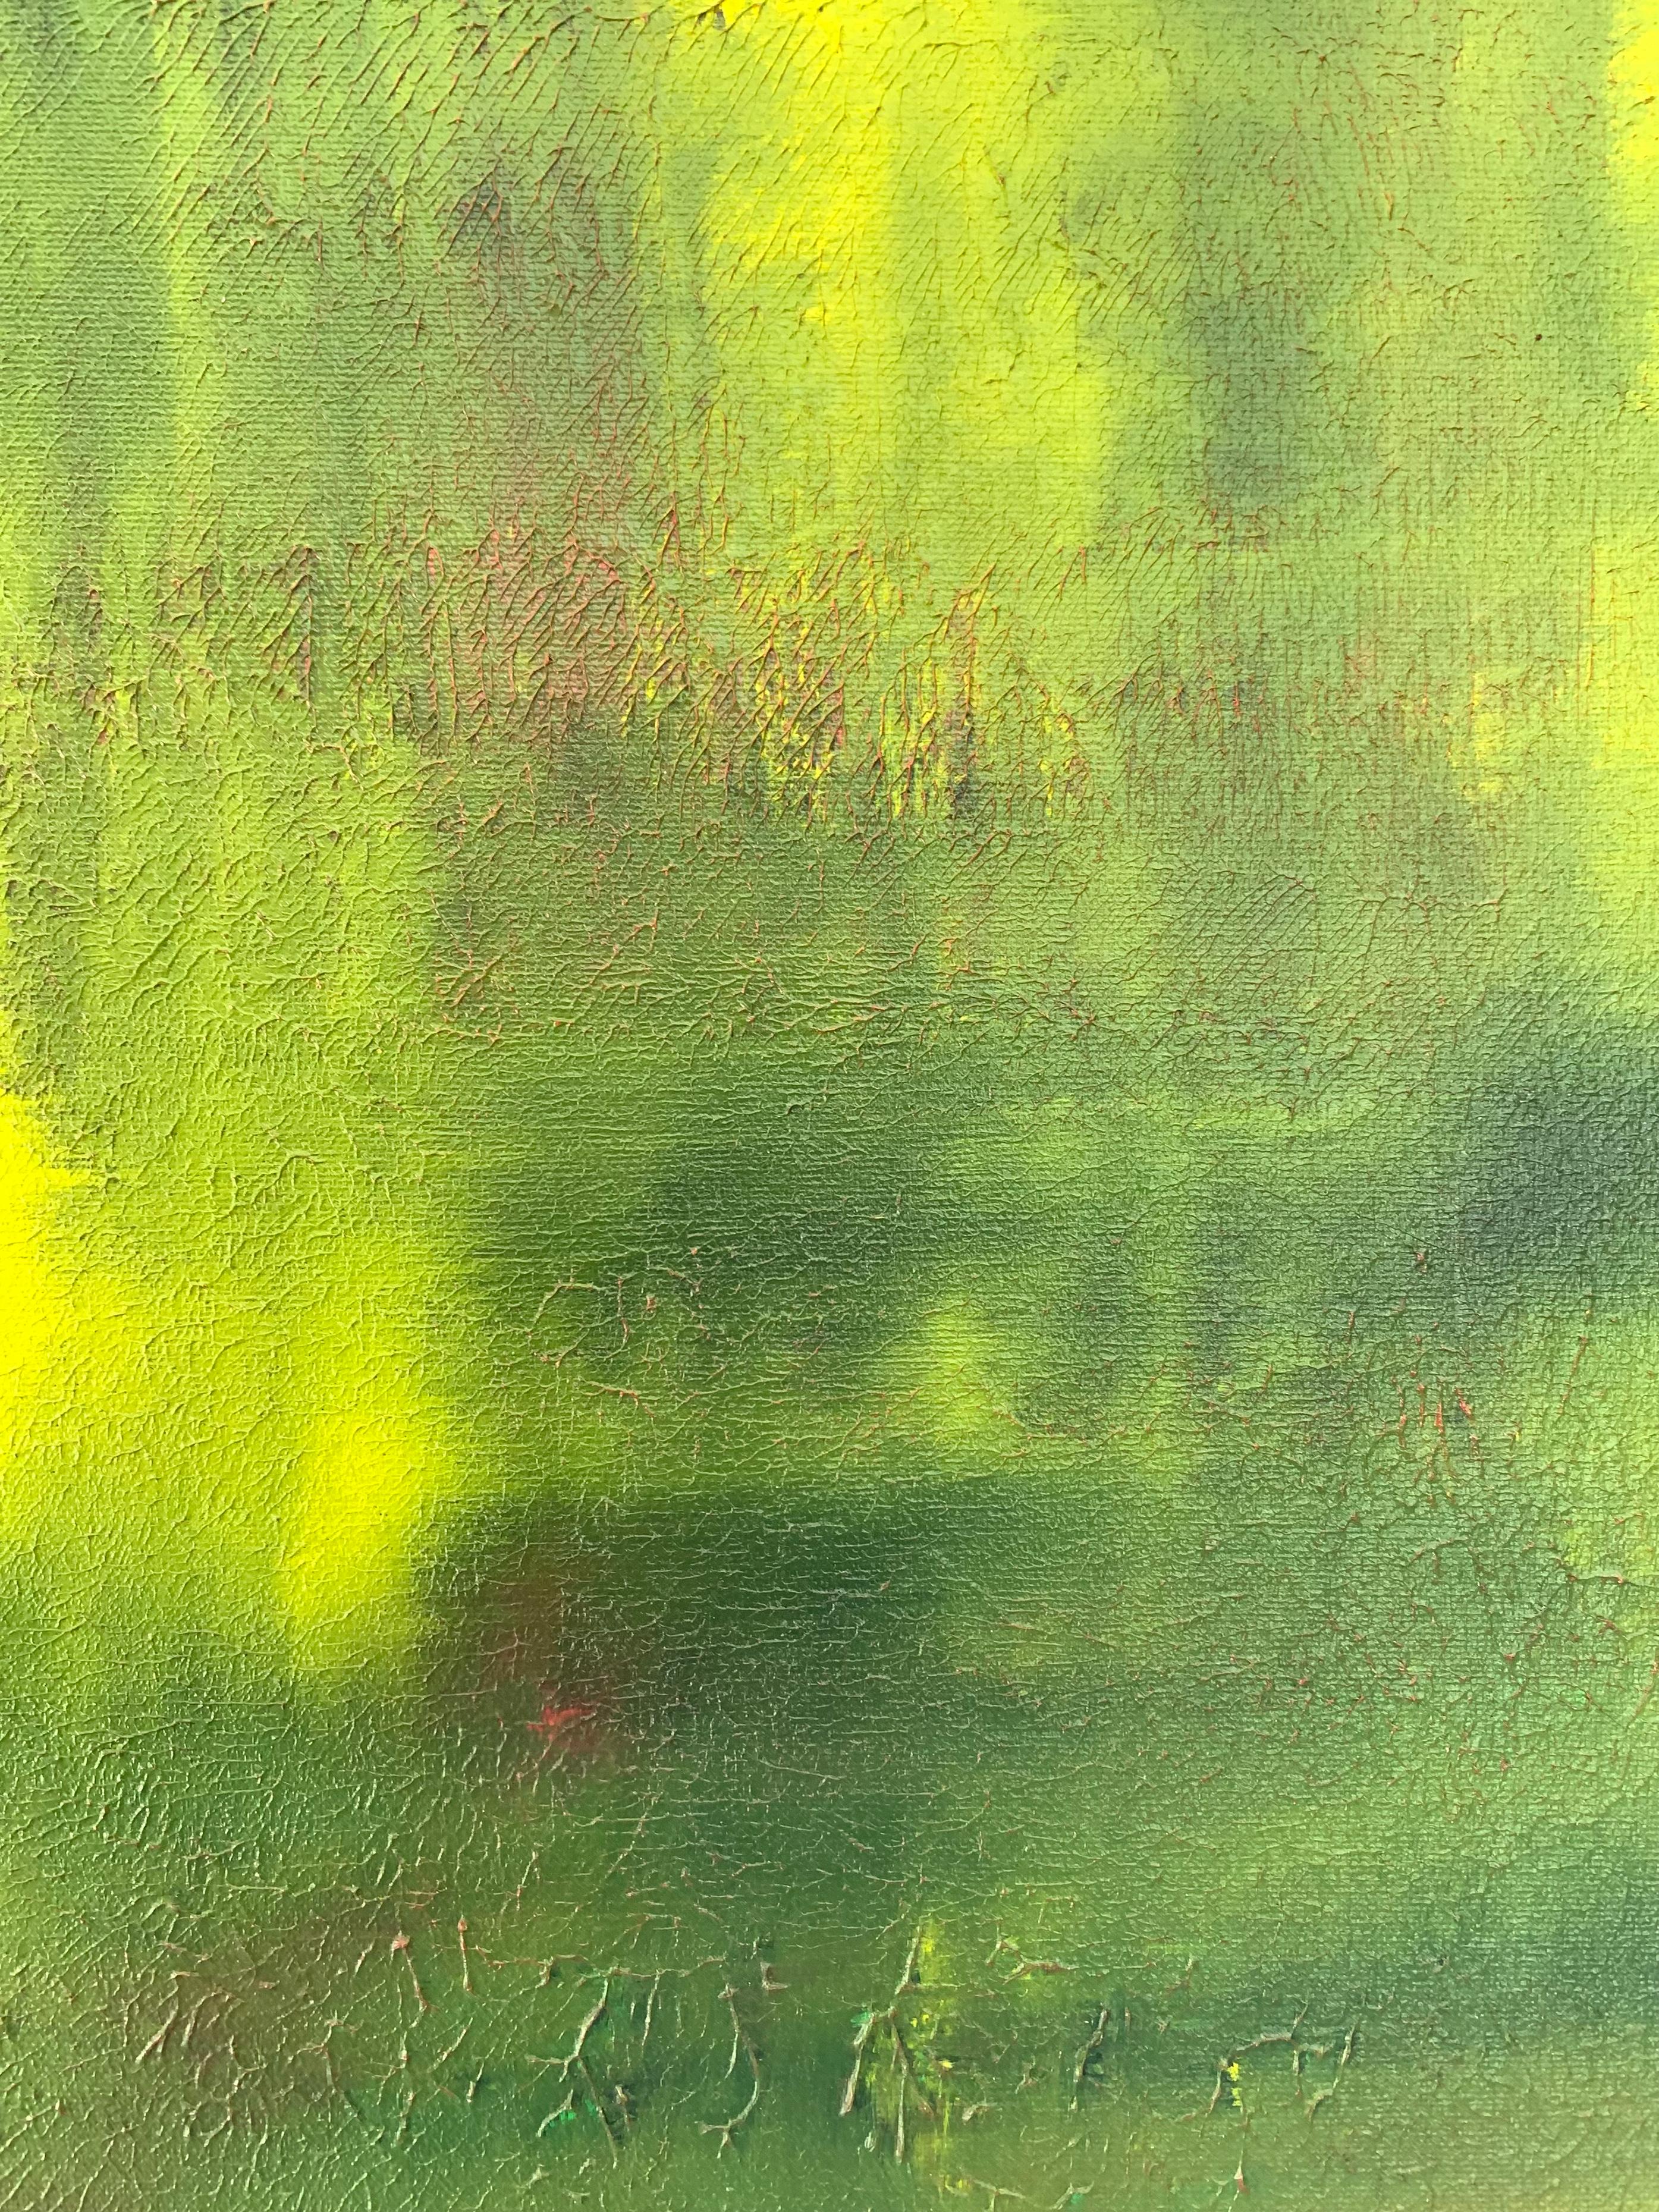 Yellow Angels - acrylic on canvas - Abstract Painting by Nina Weintraub